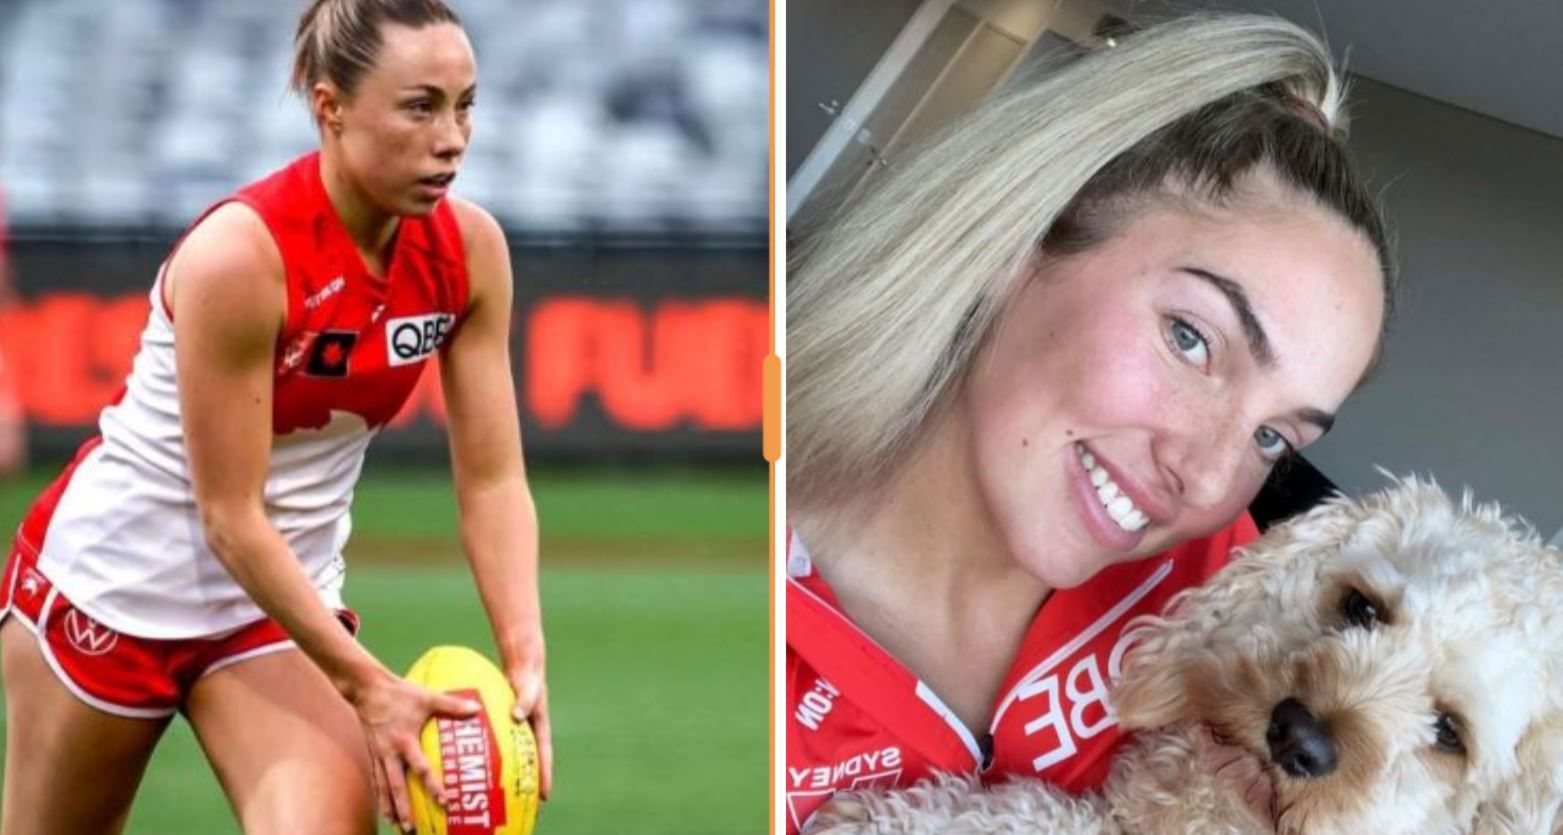 Swans AFLW duo suspended over cocaine scandal for 'conduct unbecoming'